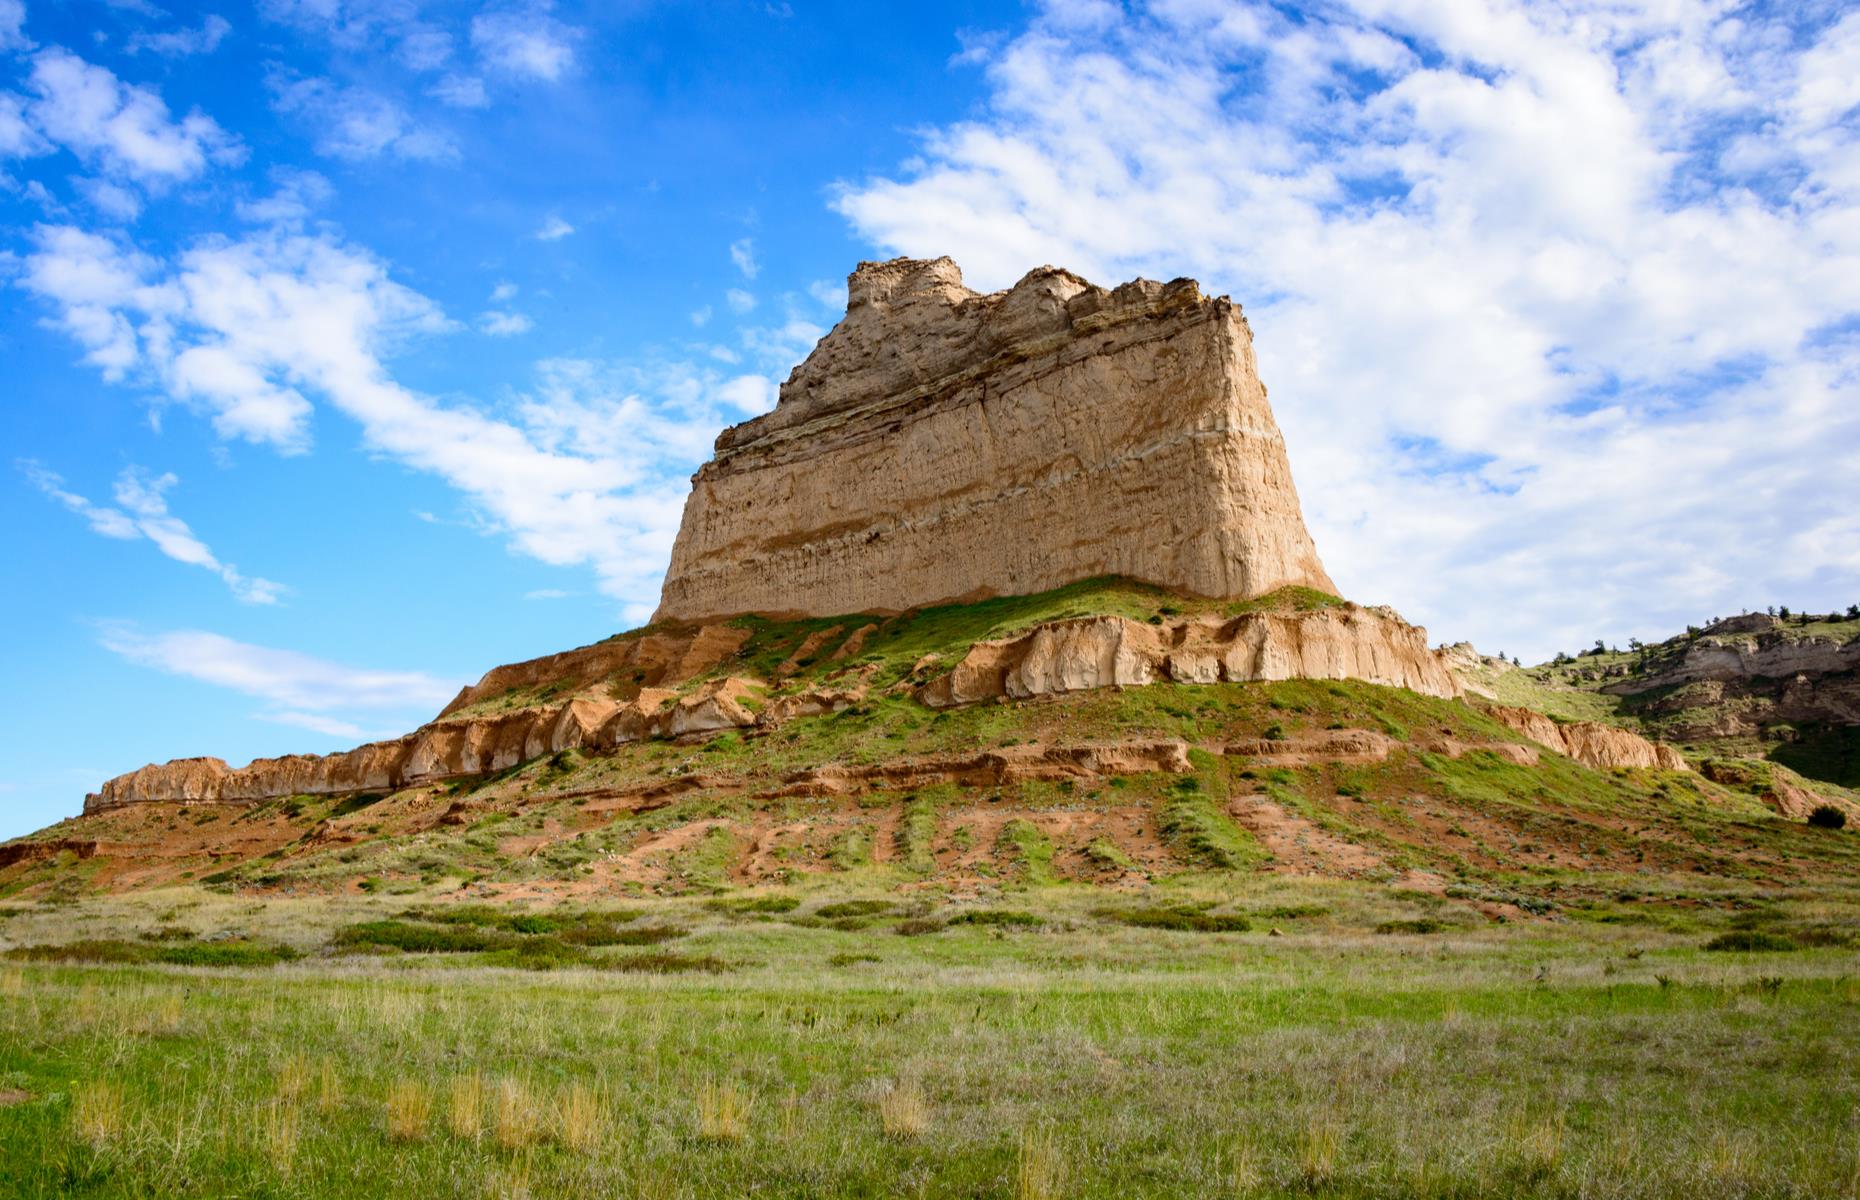 <p>A mighty crag in the American Midwest, Scotts Bluff towers some 800 feet above the plains of western Nebraska, and holds great significance. Though little evidence remains, it’s thought that early Indigenous tribes once camped in the wake of the bluff, while westward emigrants following the Oregon, California and Mormon Trails in the 19th century would have gazed up at its great expanse. The Oregon Trail Museum and Visitor Center breathes life into these historic journeys, while the 1.6-mile Summit Road winds right to the top of the peak.</p>